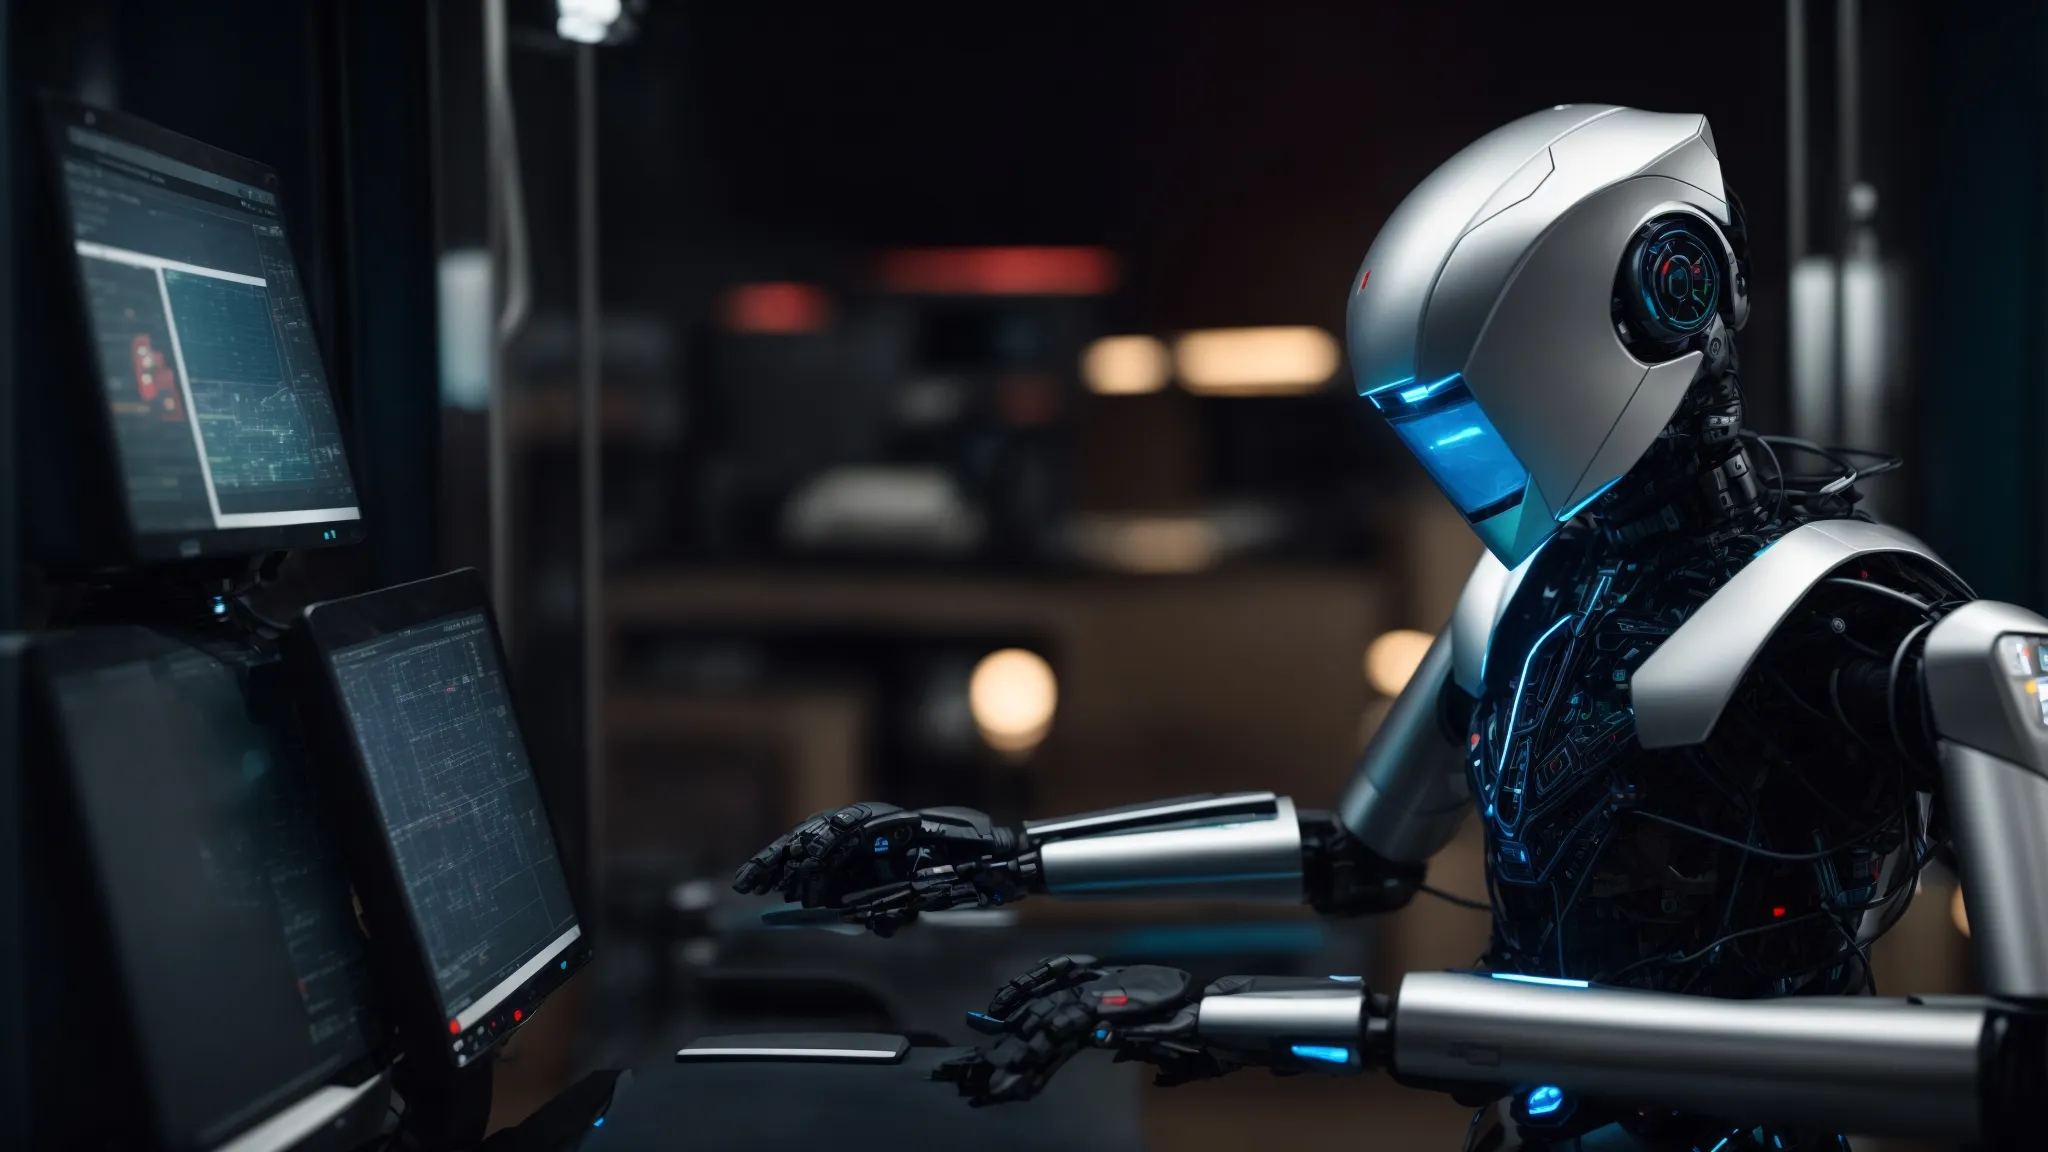 a humanoid robot interacting with a computer displaying graphs and network connections.